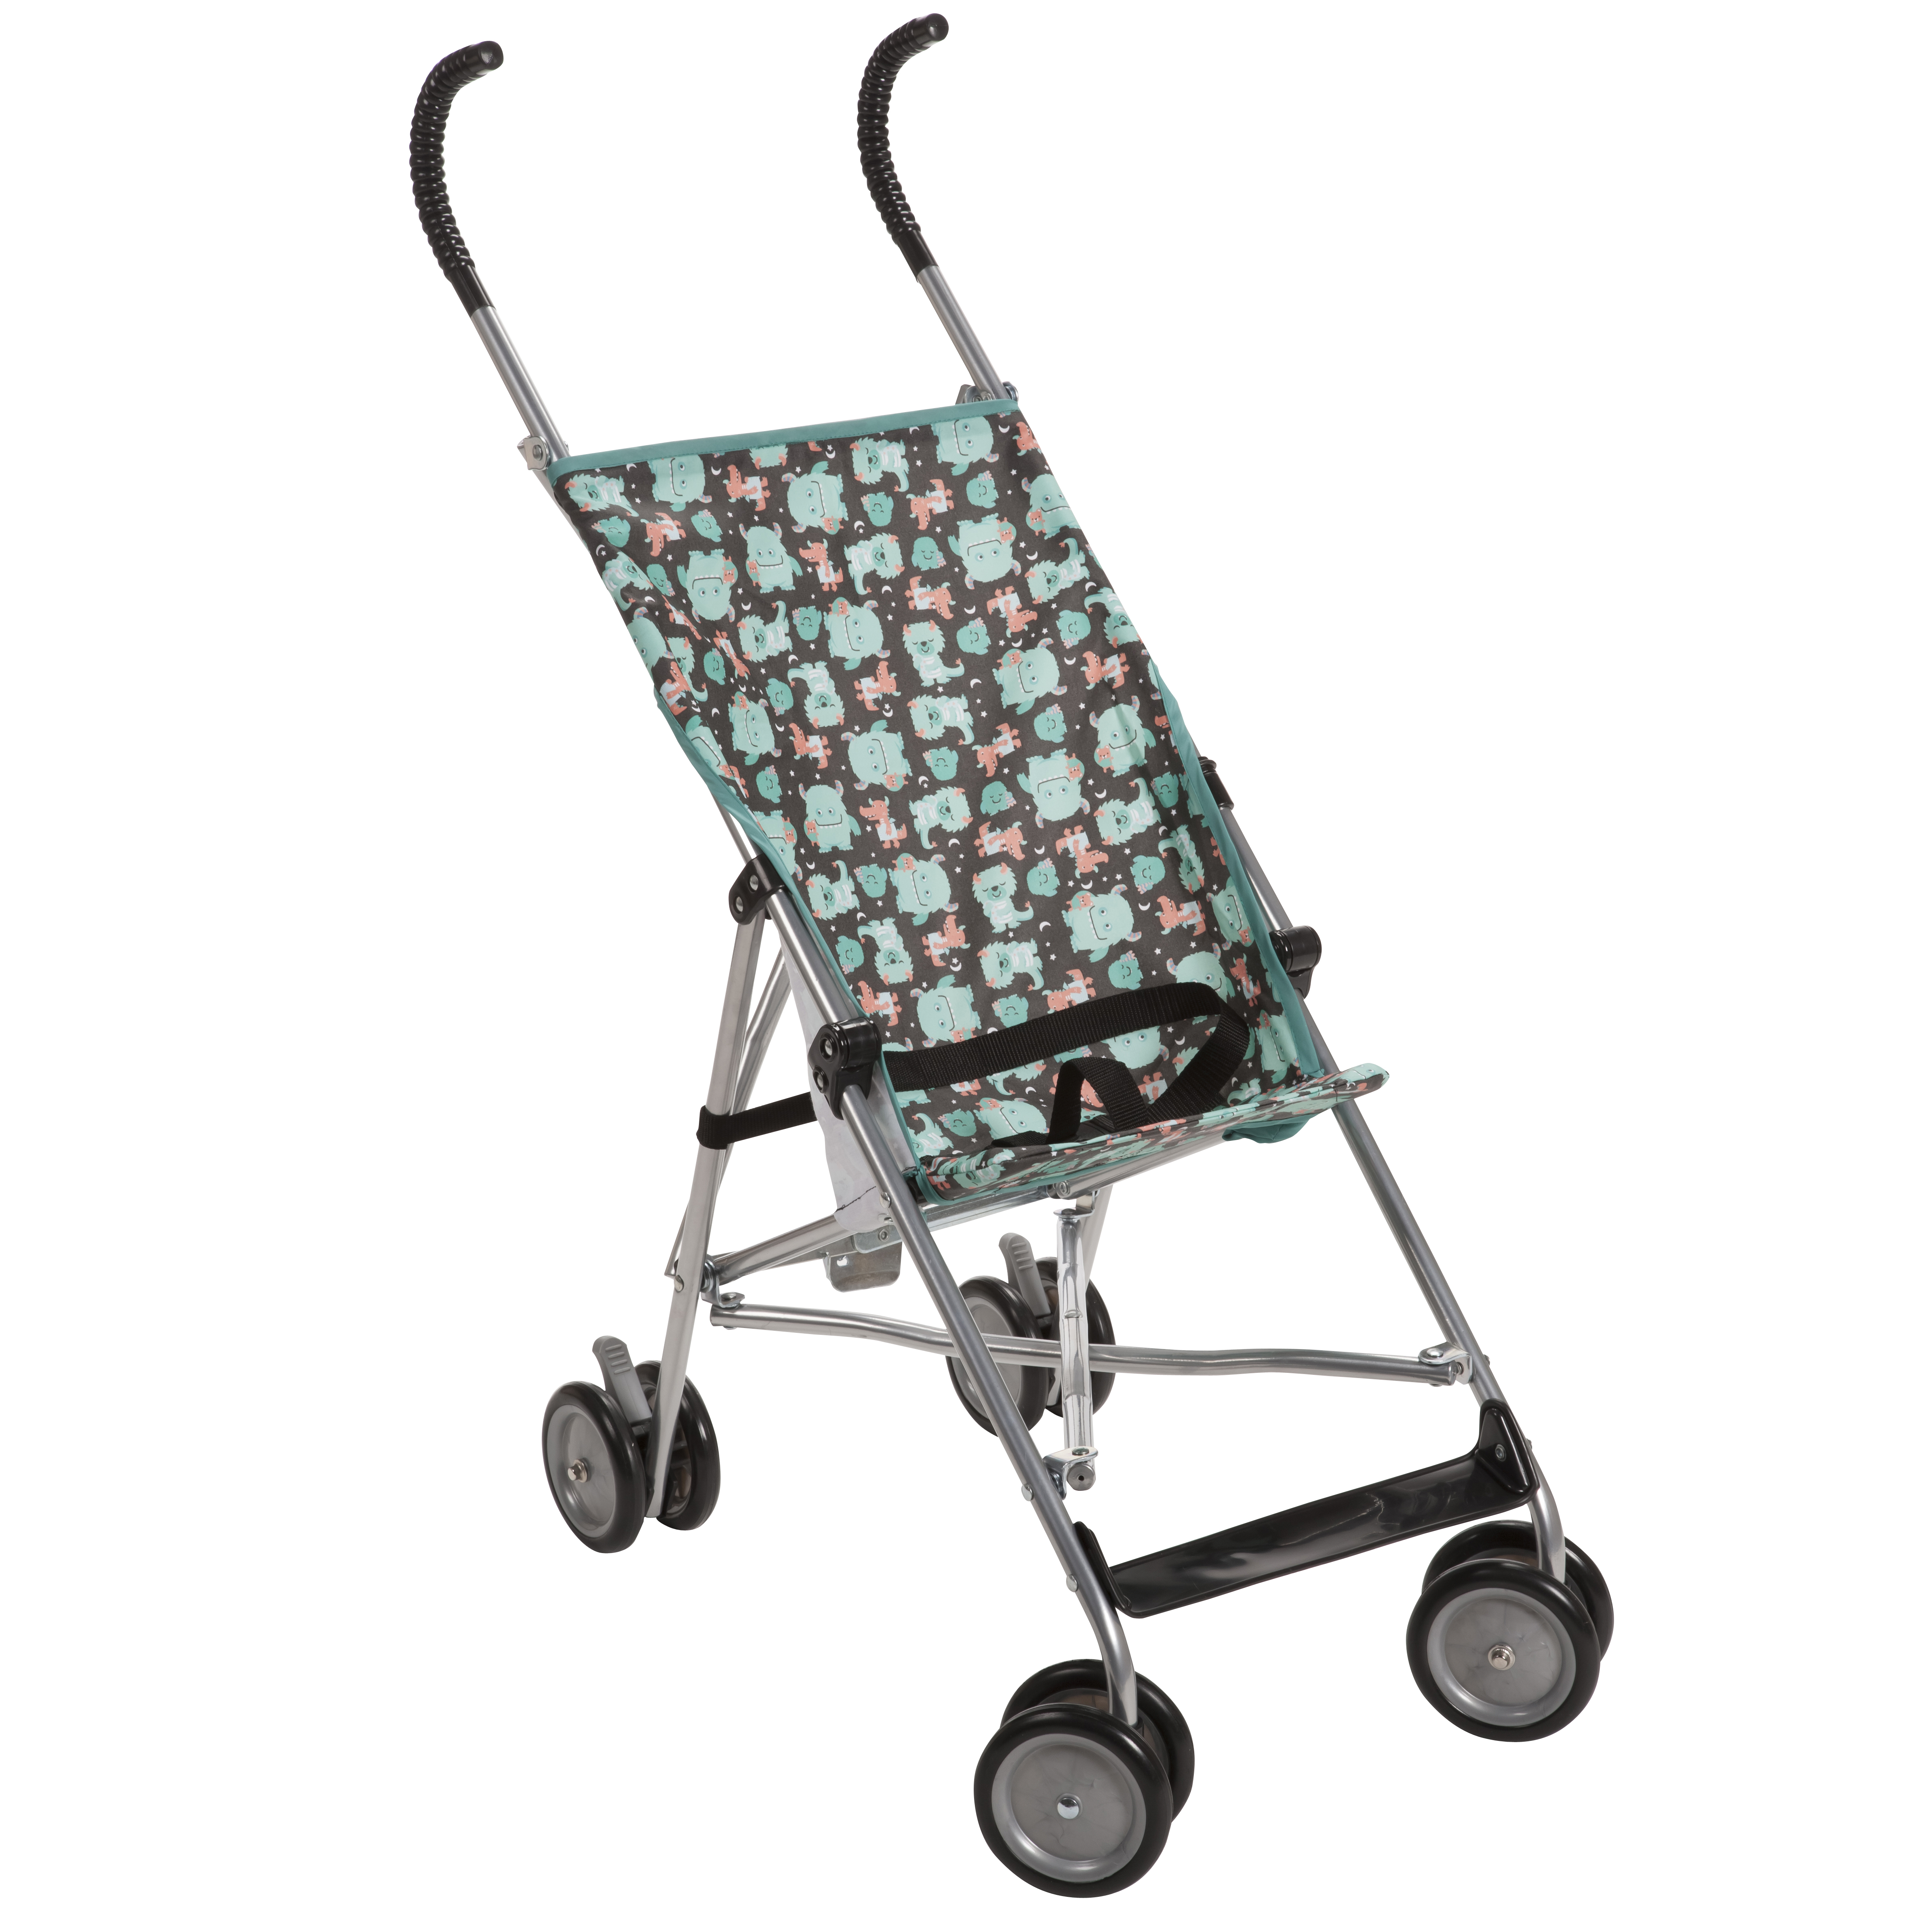 Cosco Umbrella Stroller without canopy - Sleep Monsters